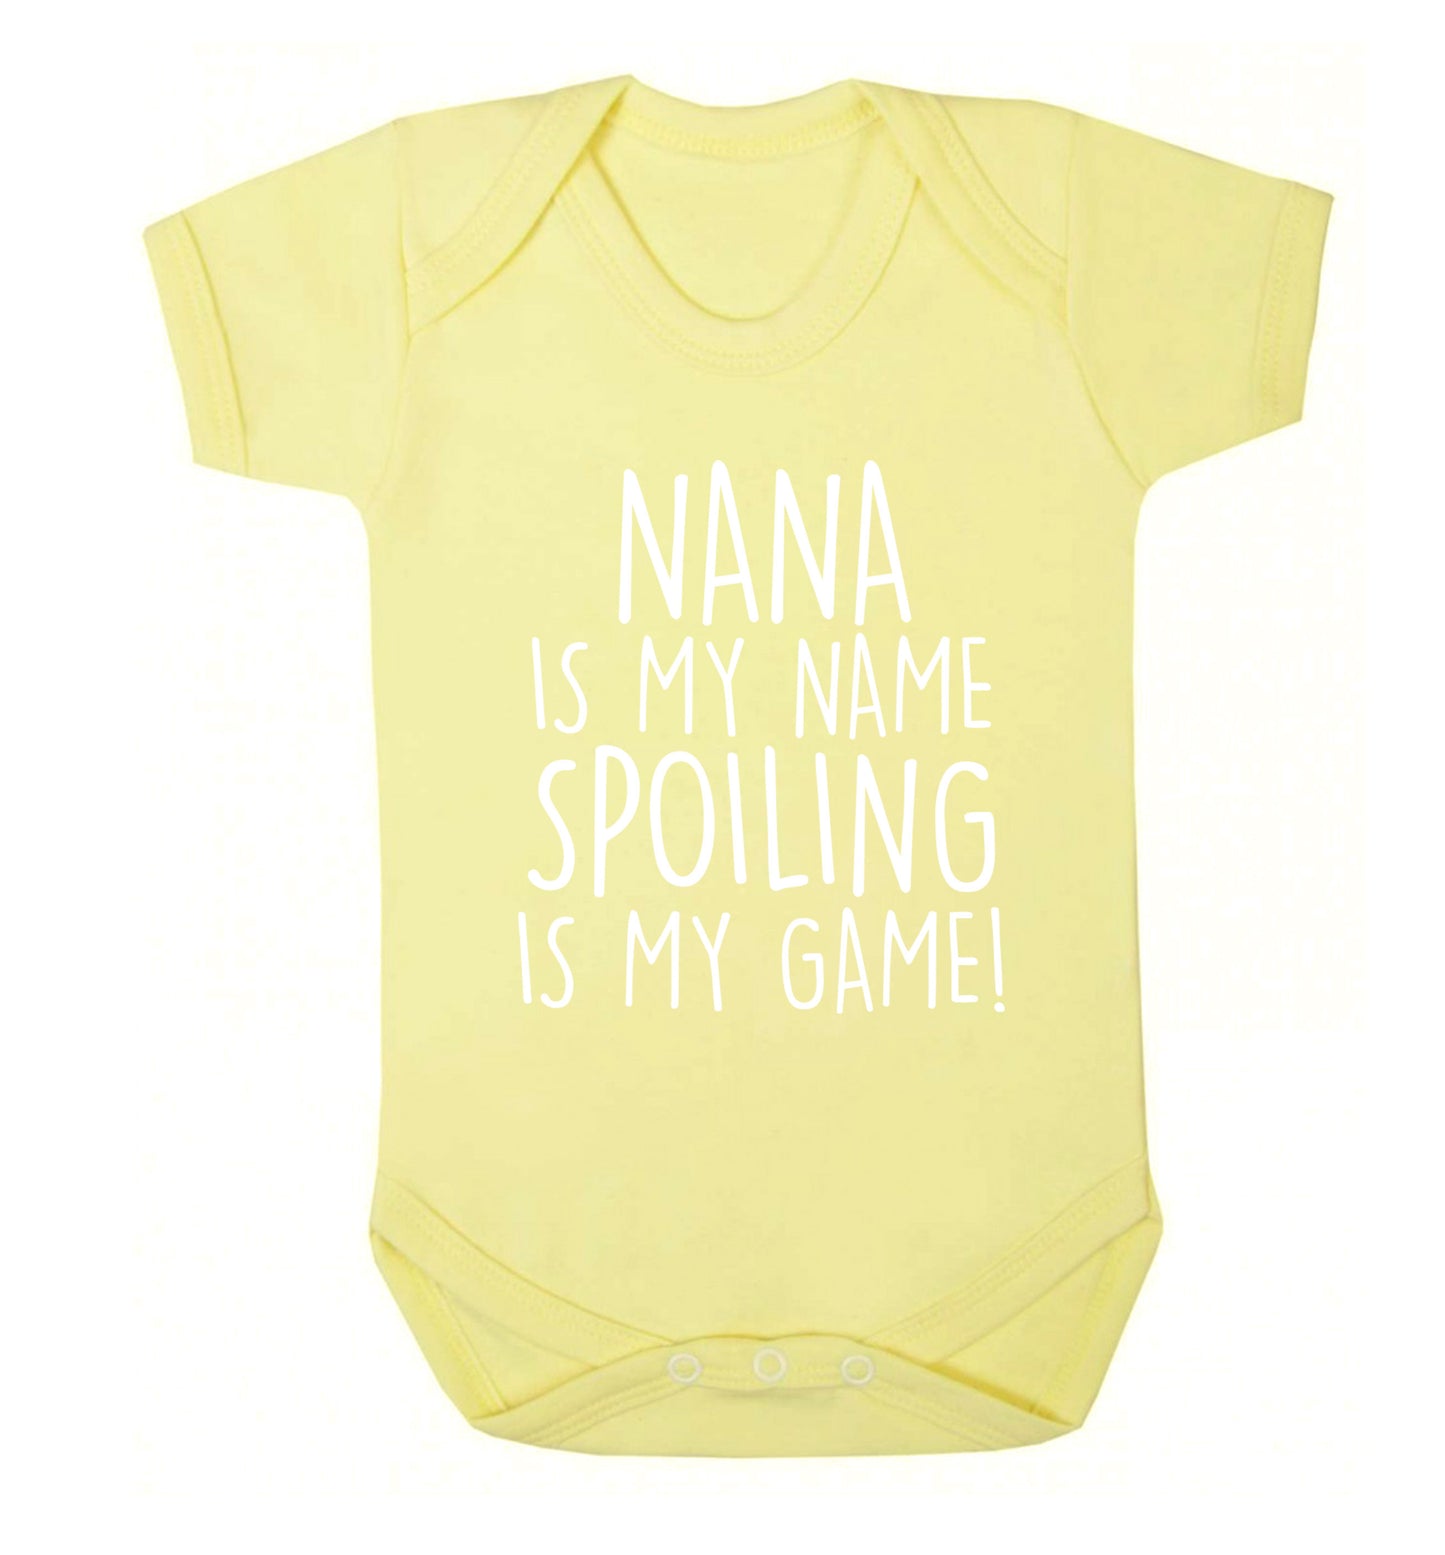 Nana is my name, spoiling is my game Baby Vest pale yellow 18-24 months